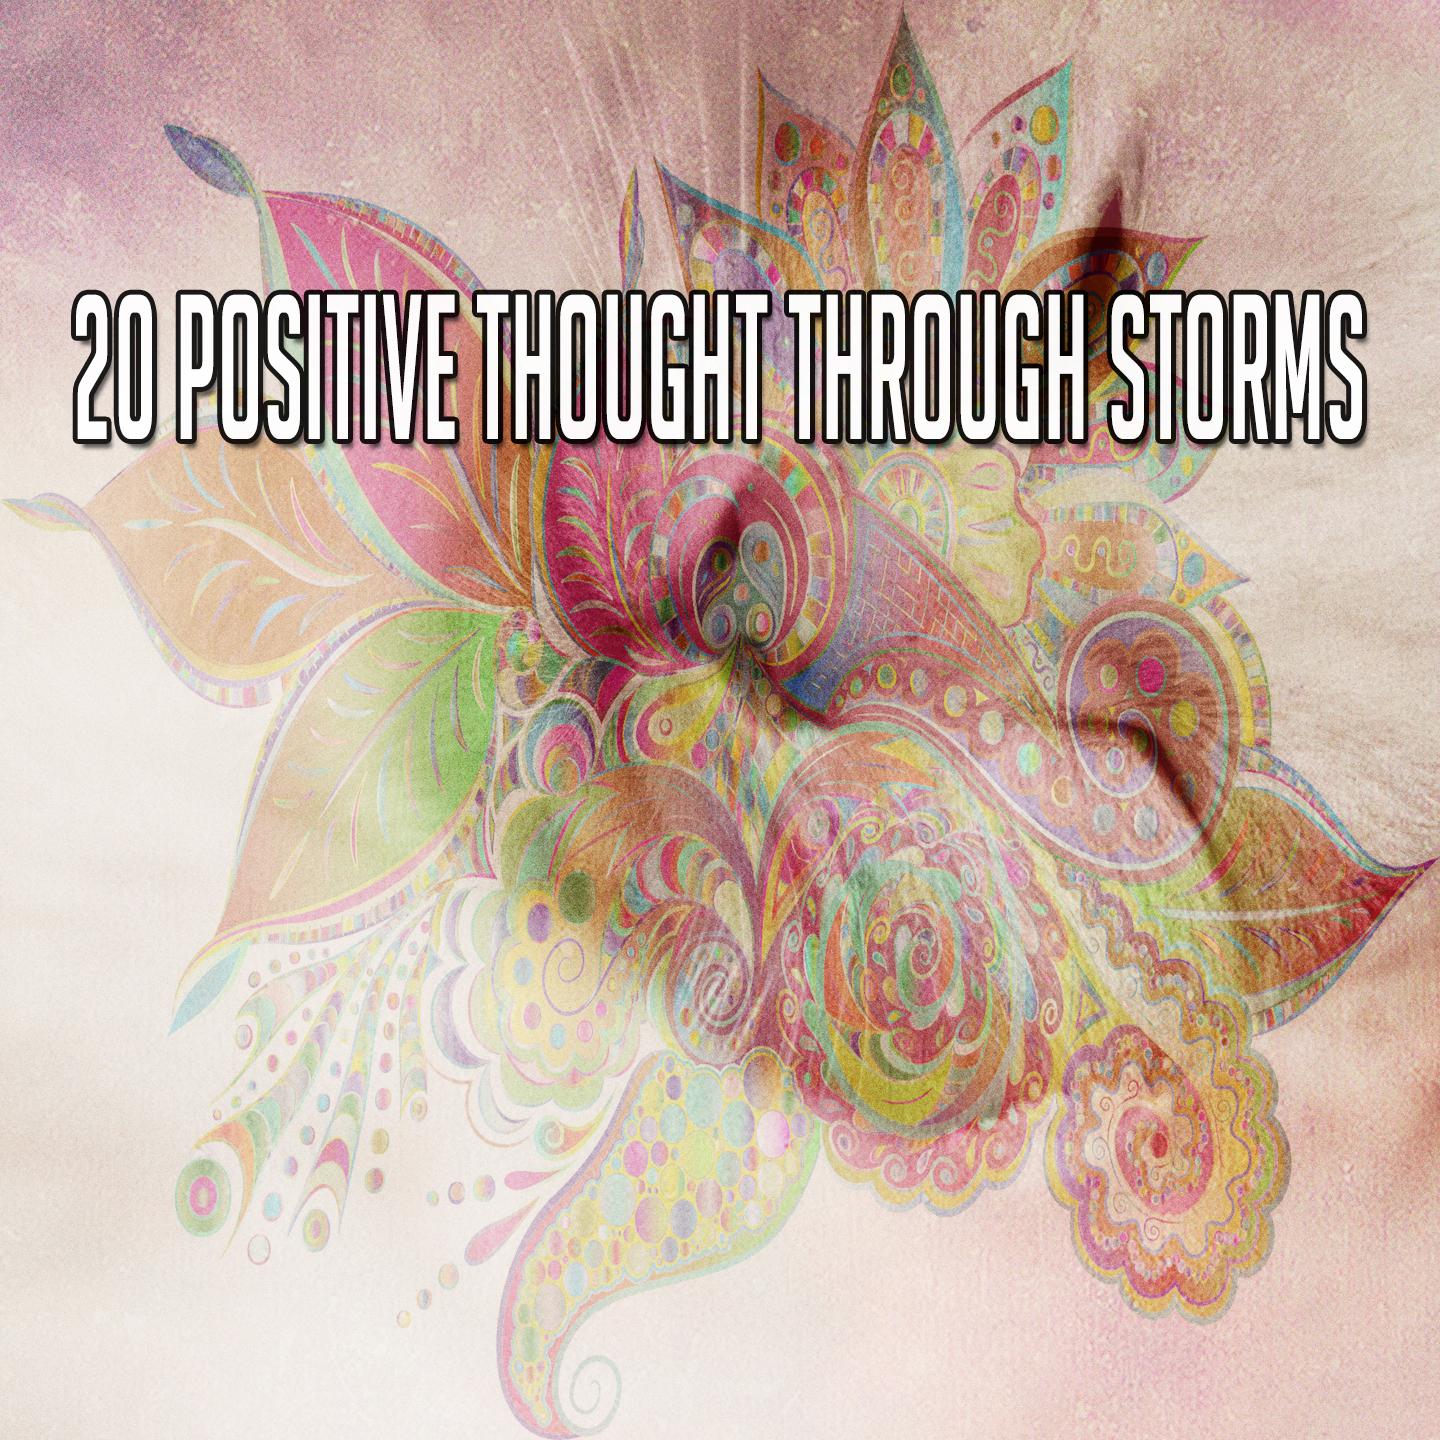 20 Positive Thought Through Storms